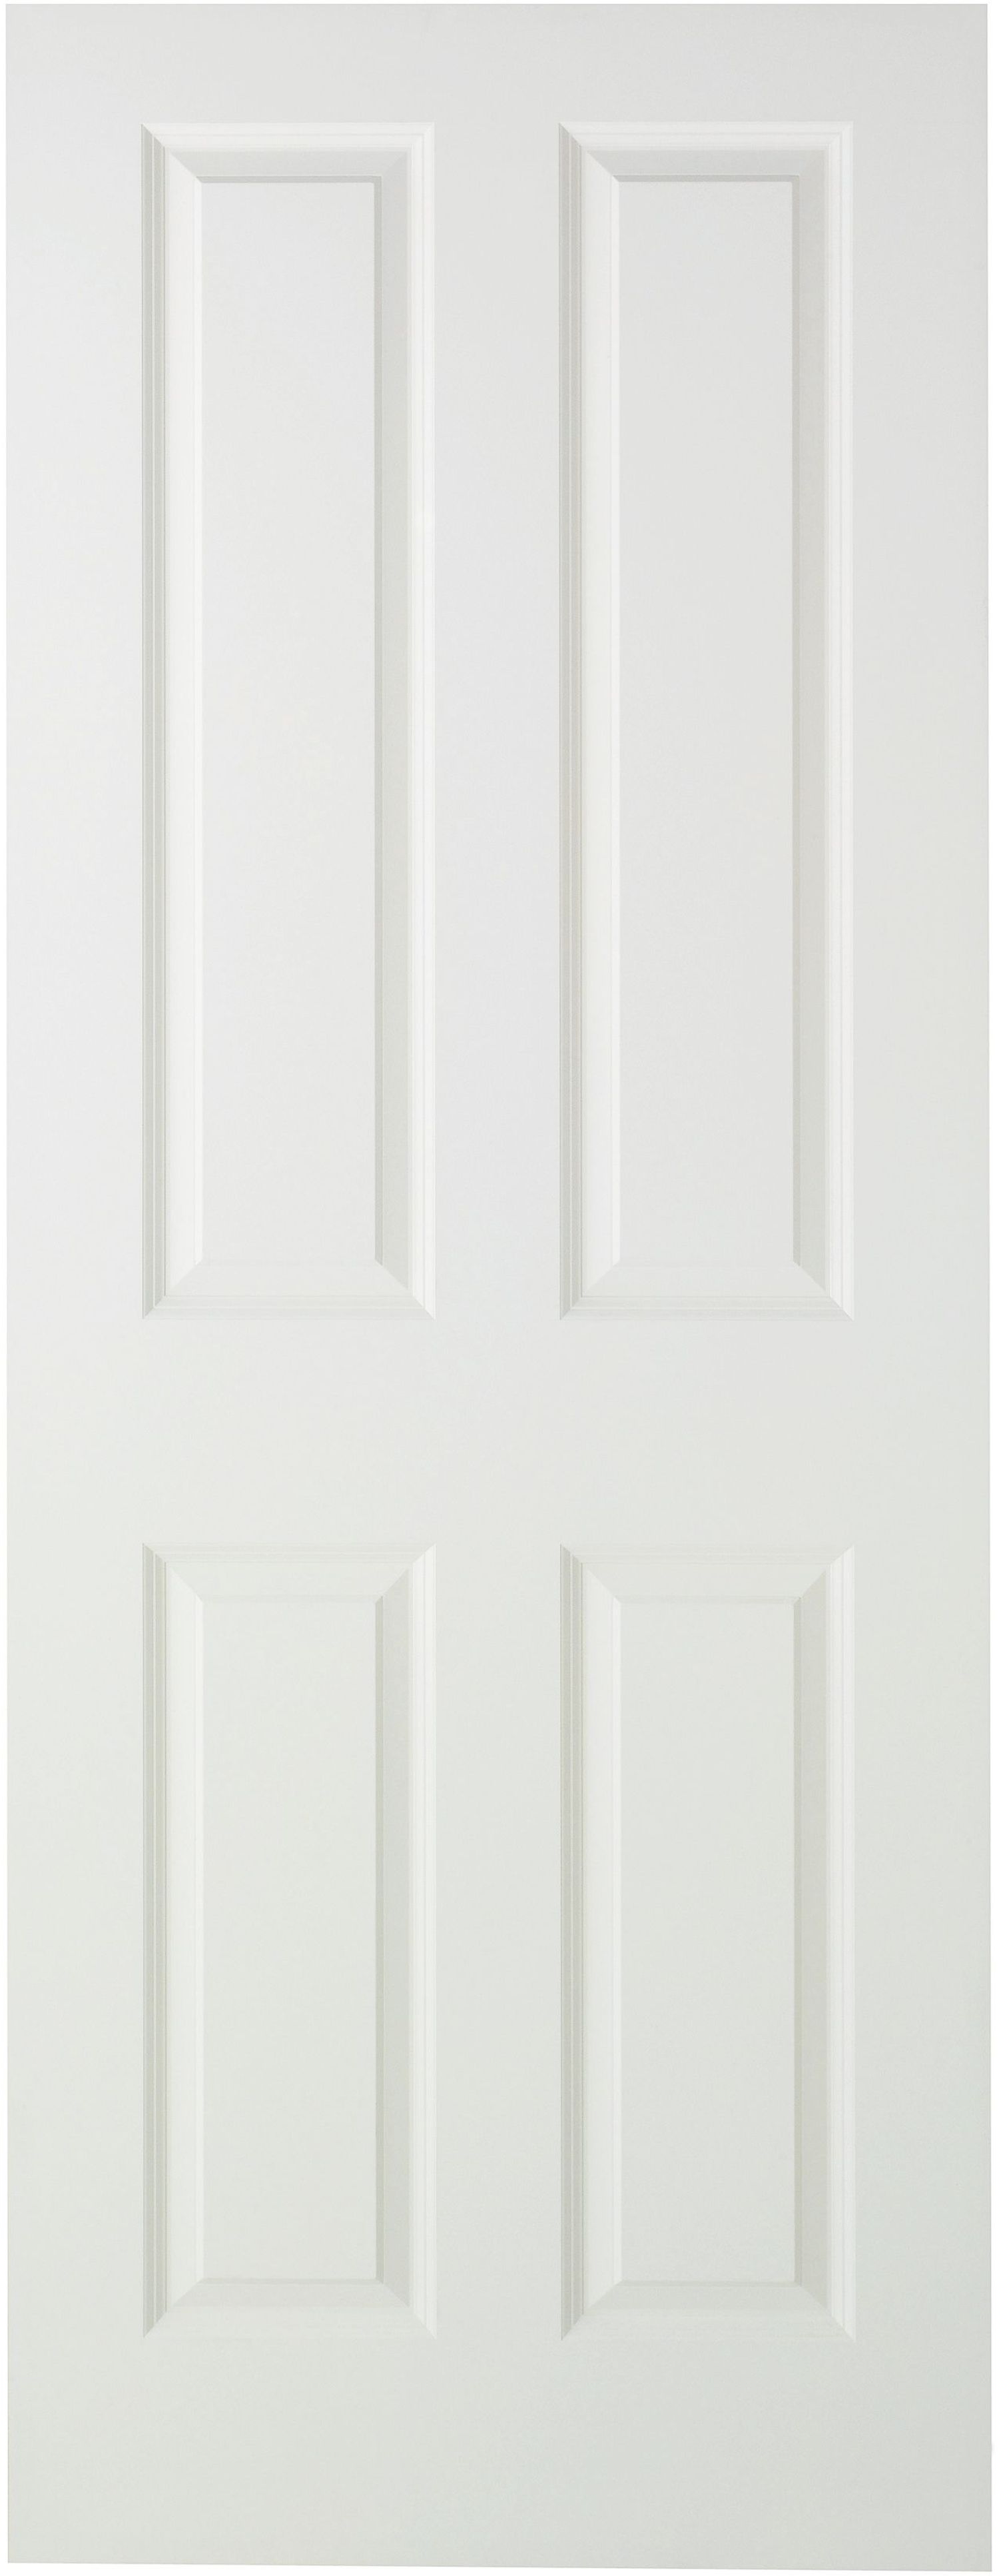 Image of Wickes Chester White Smooth Moulded 4 Panel FD30 Internal Fire Door - 1981 x 762mm